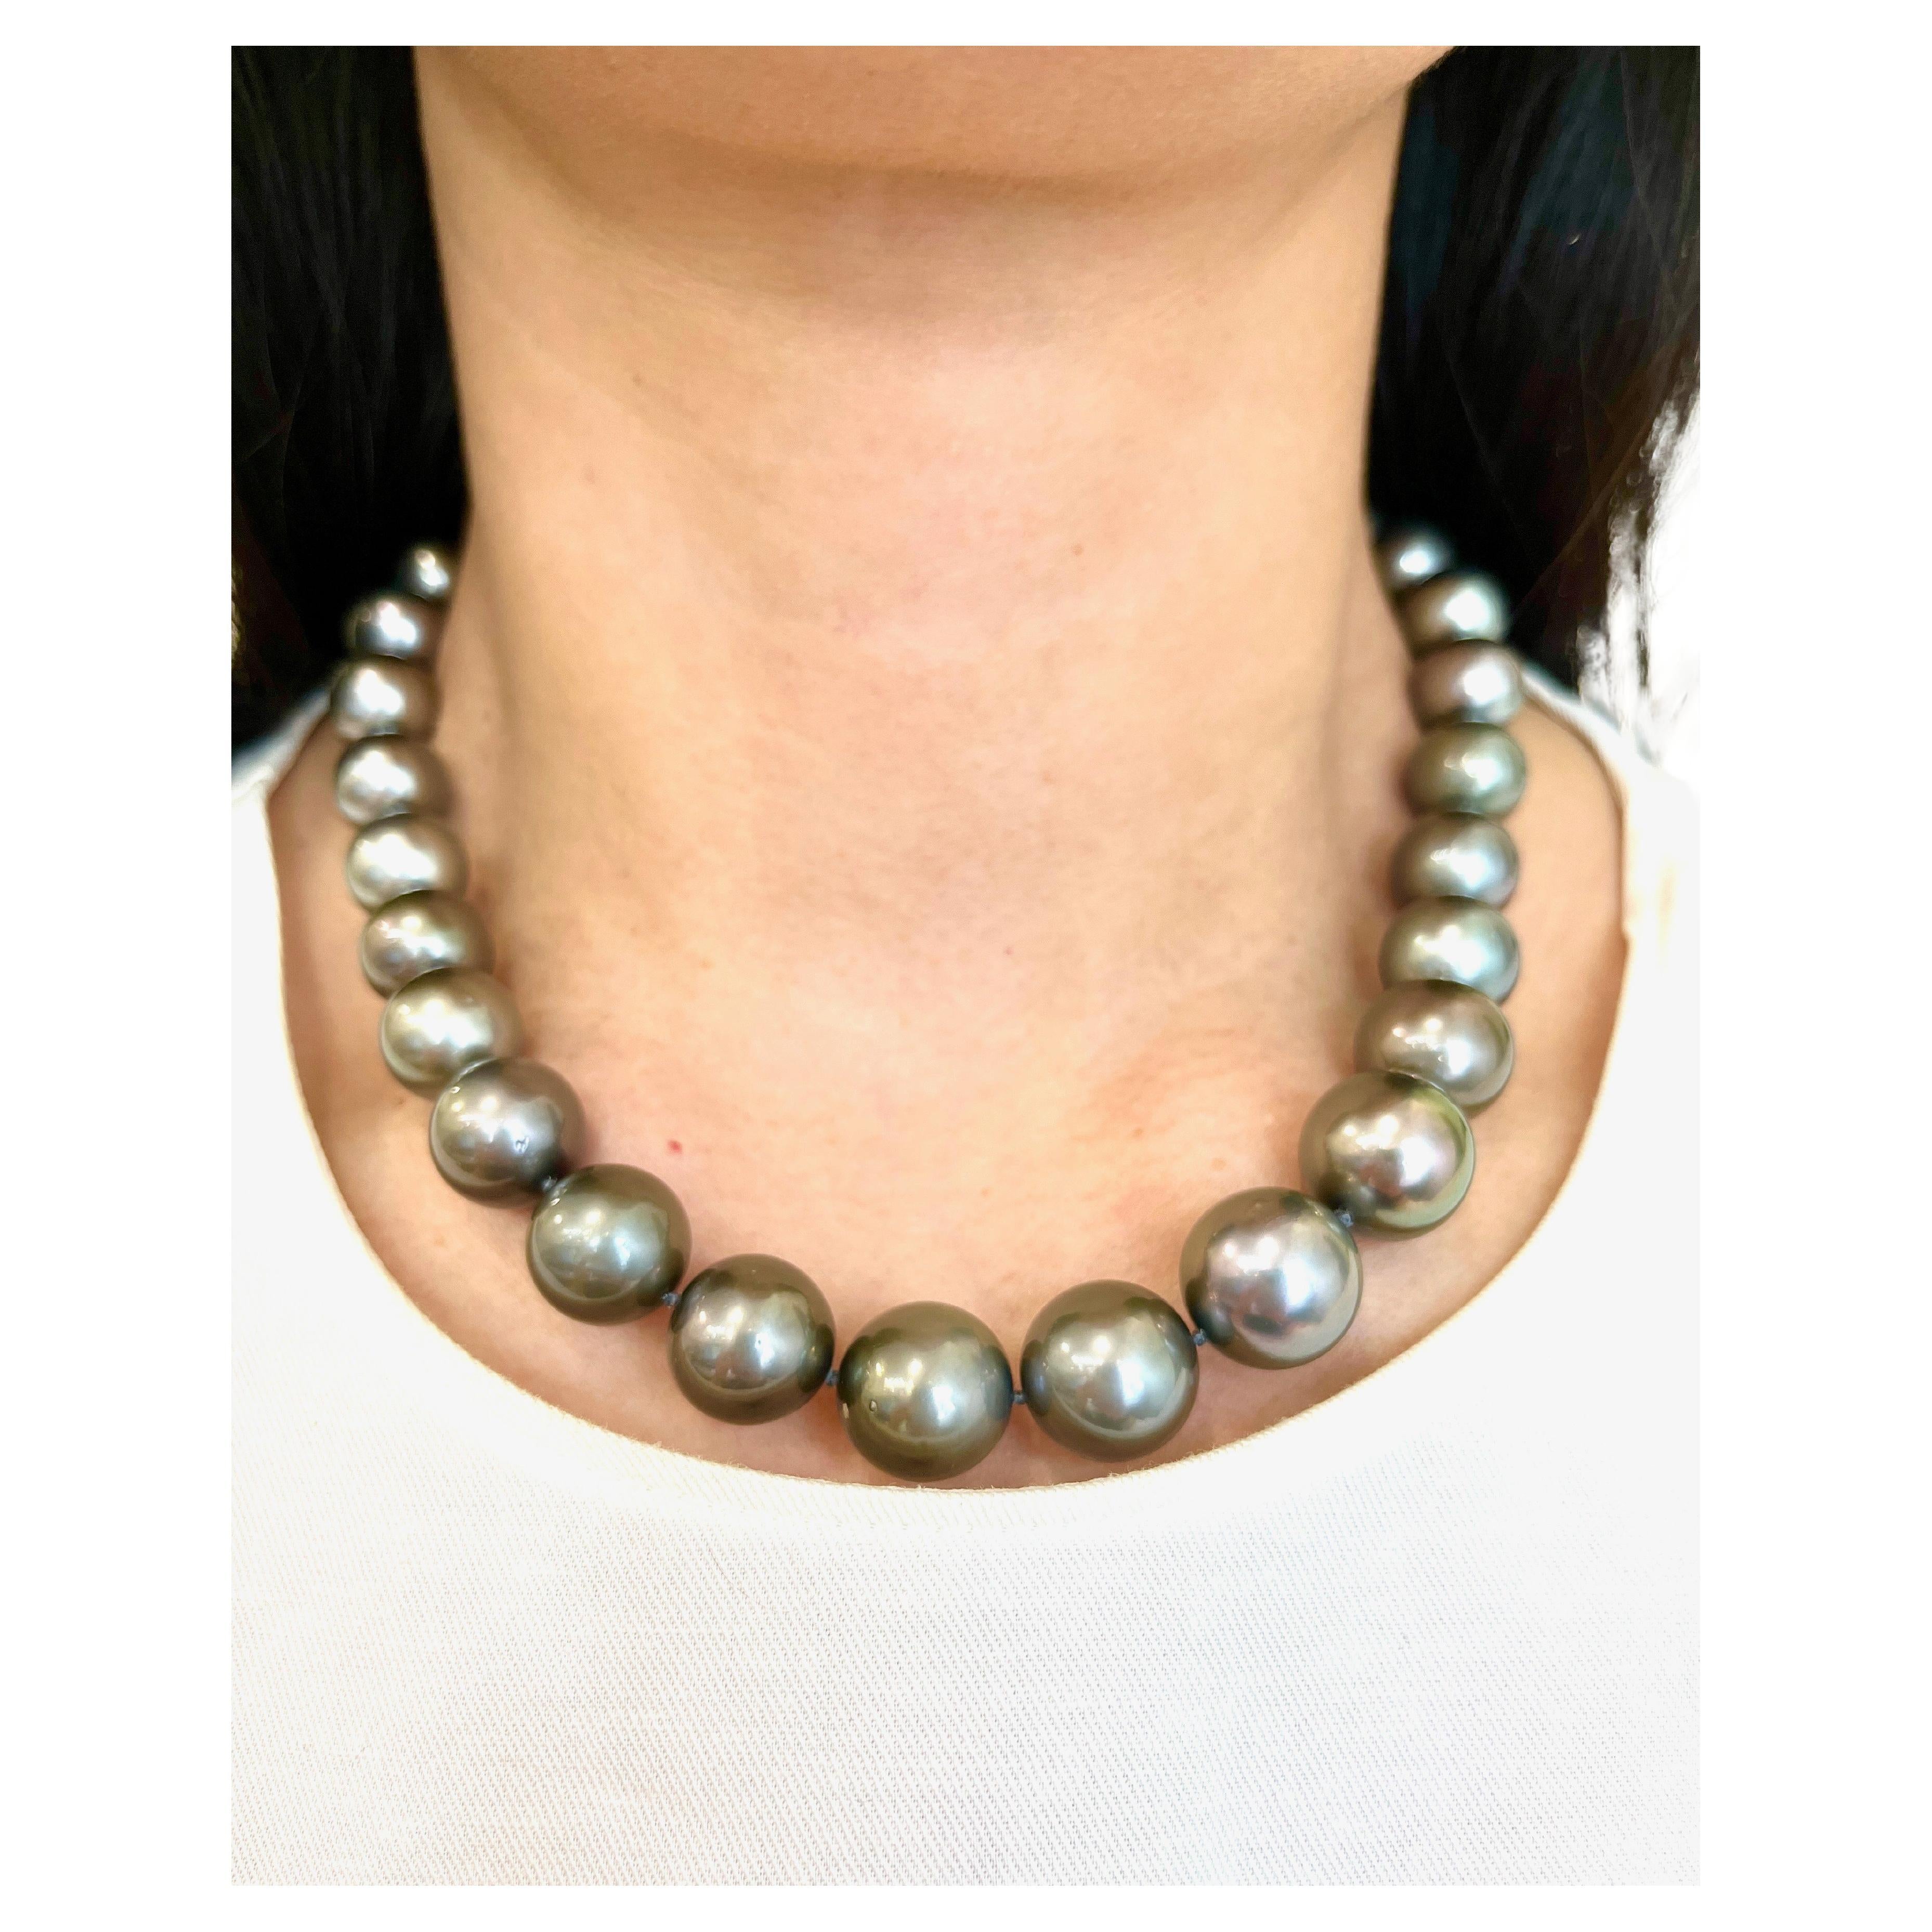 2.83 ct Diamond Clasp & Natural Tahitian Black Pearl Necklace For Sale